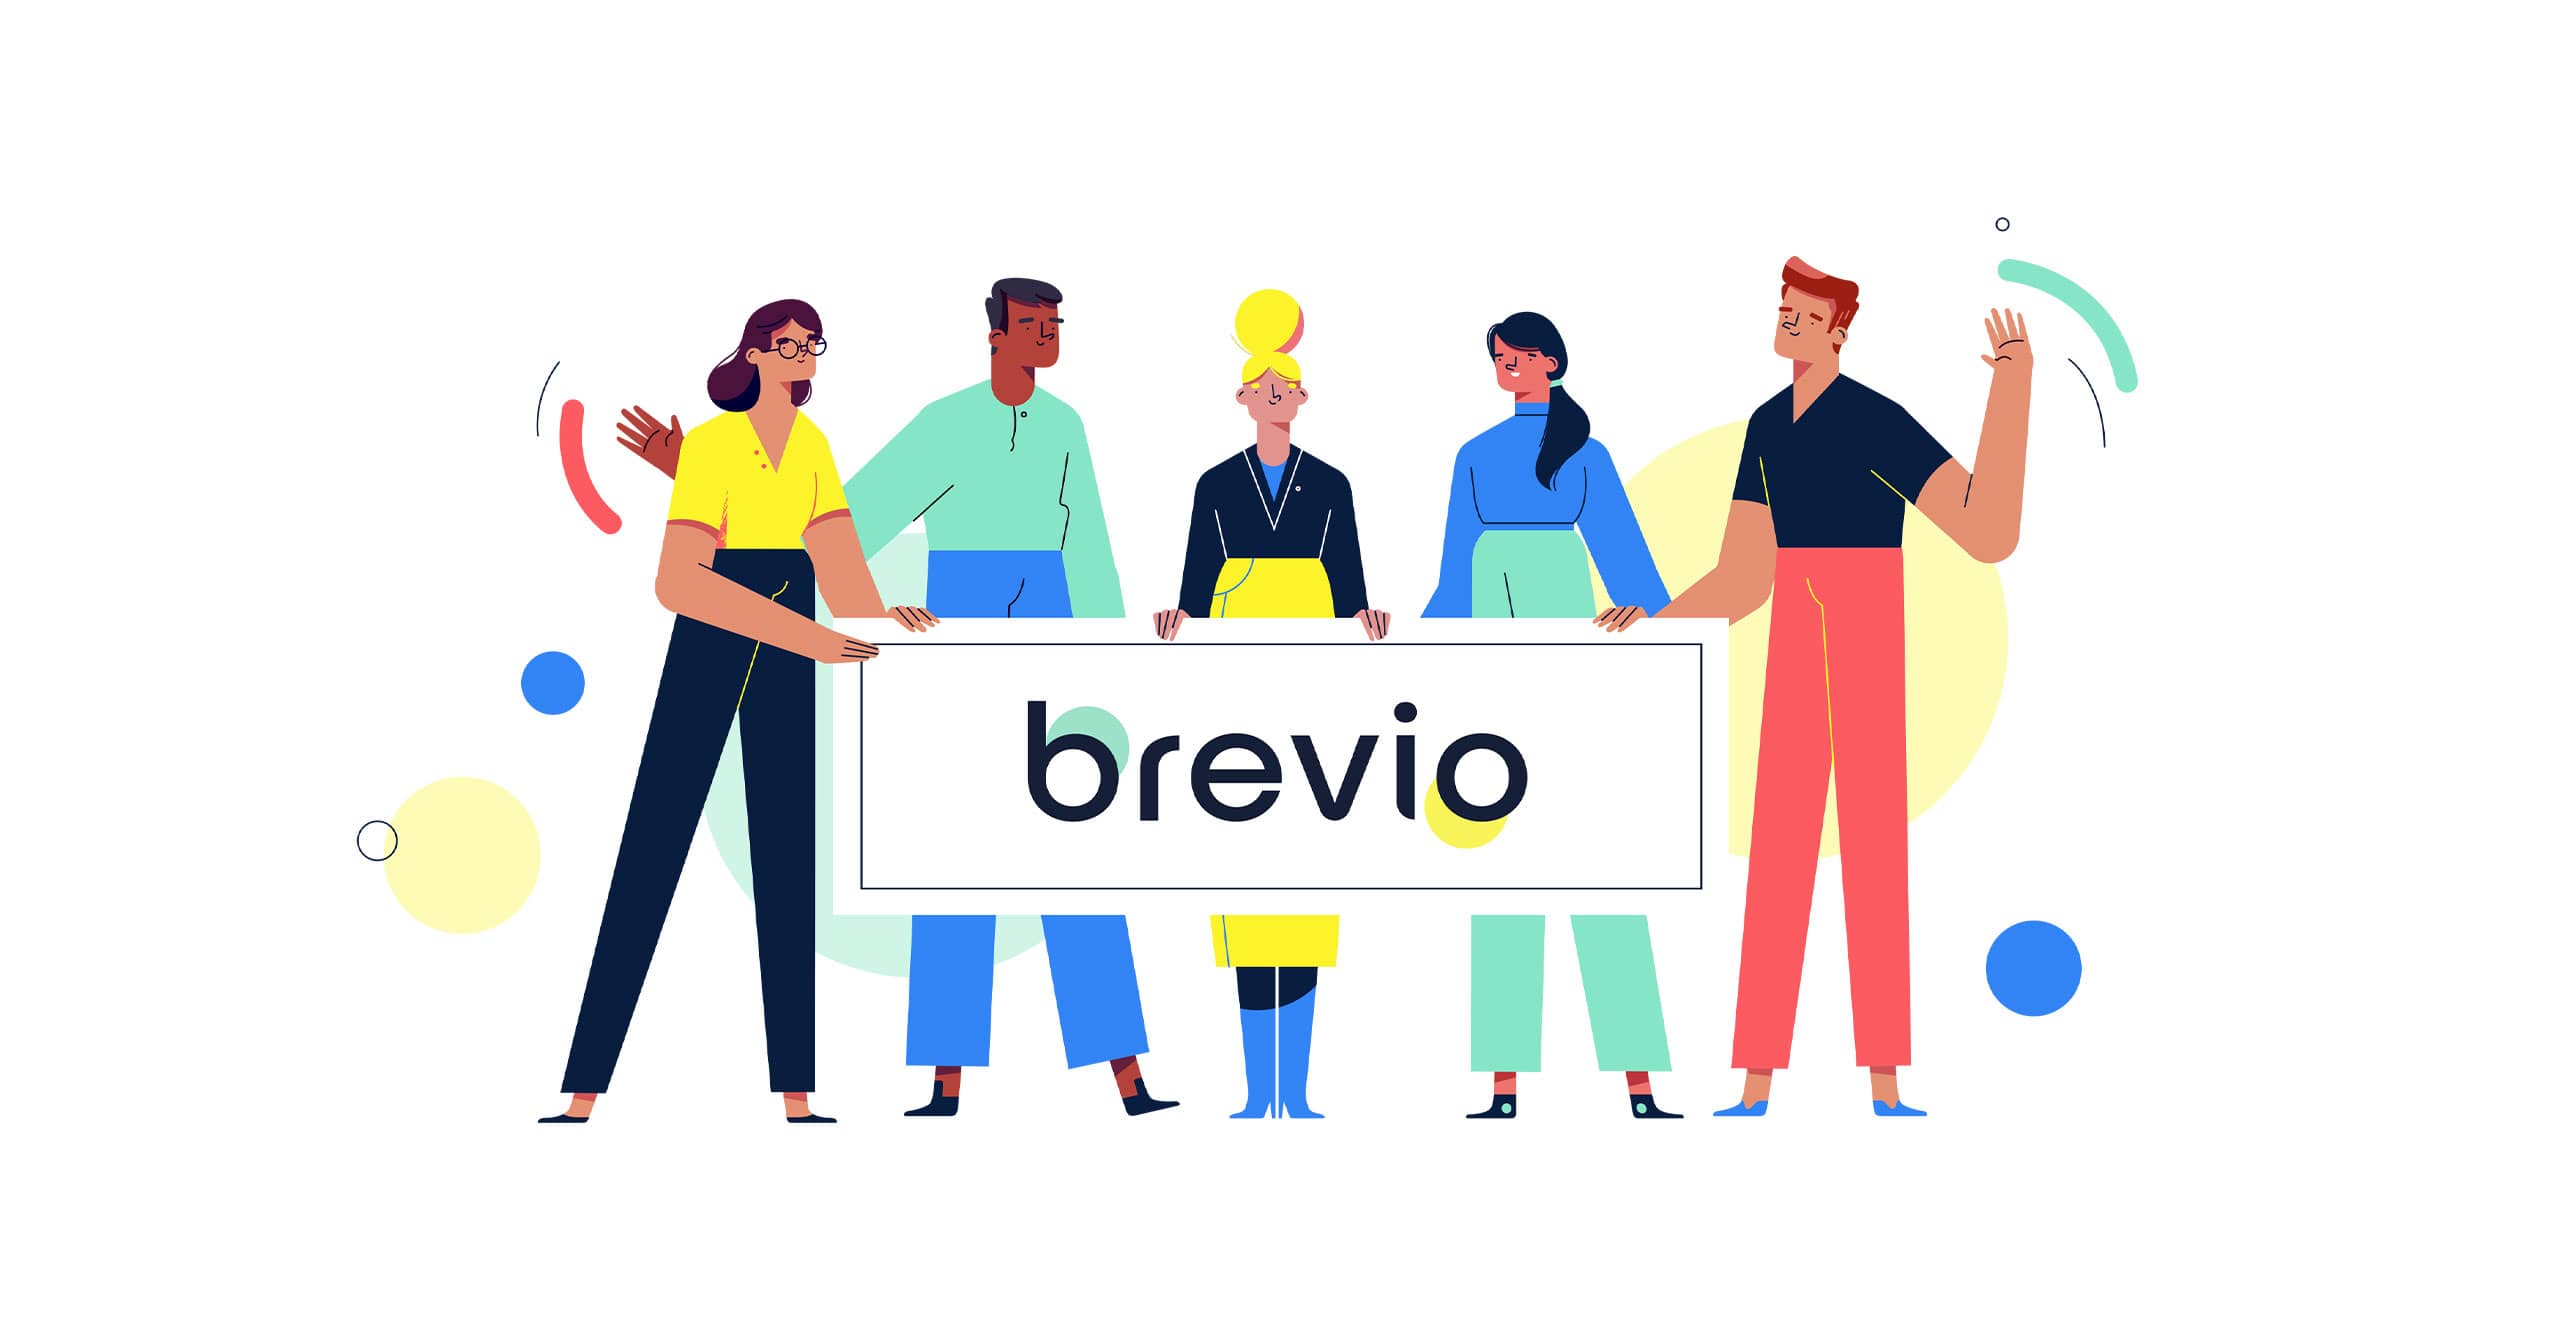 Illustrated characters holding a sign with the Brevio logo